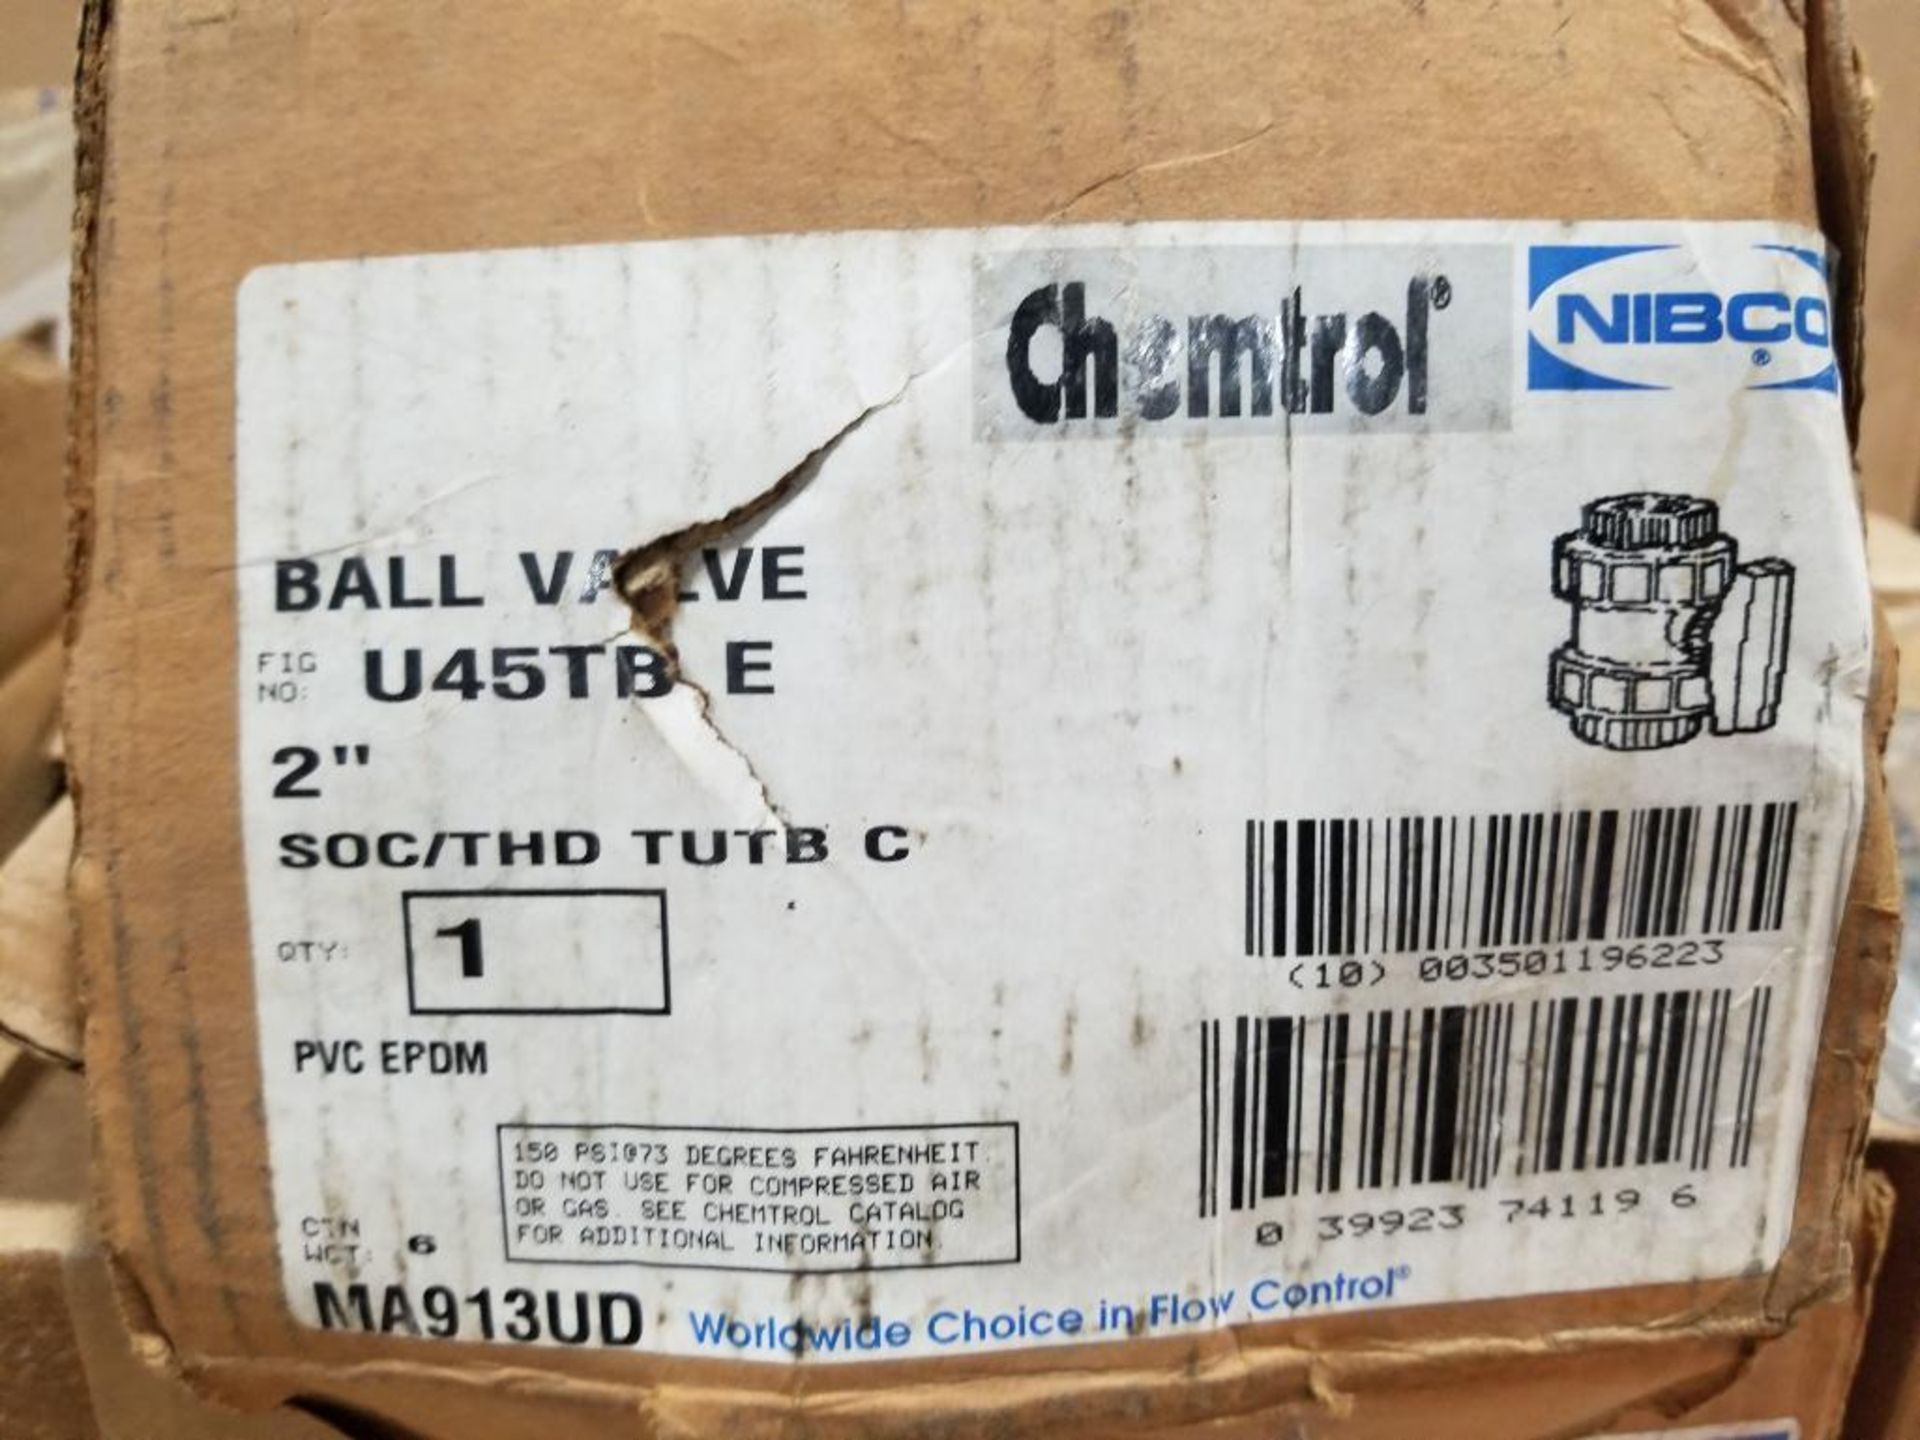 Assorted Nibco Chemtrol ball valve. - Image 2 of 7